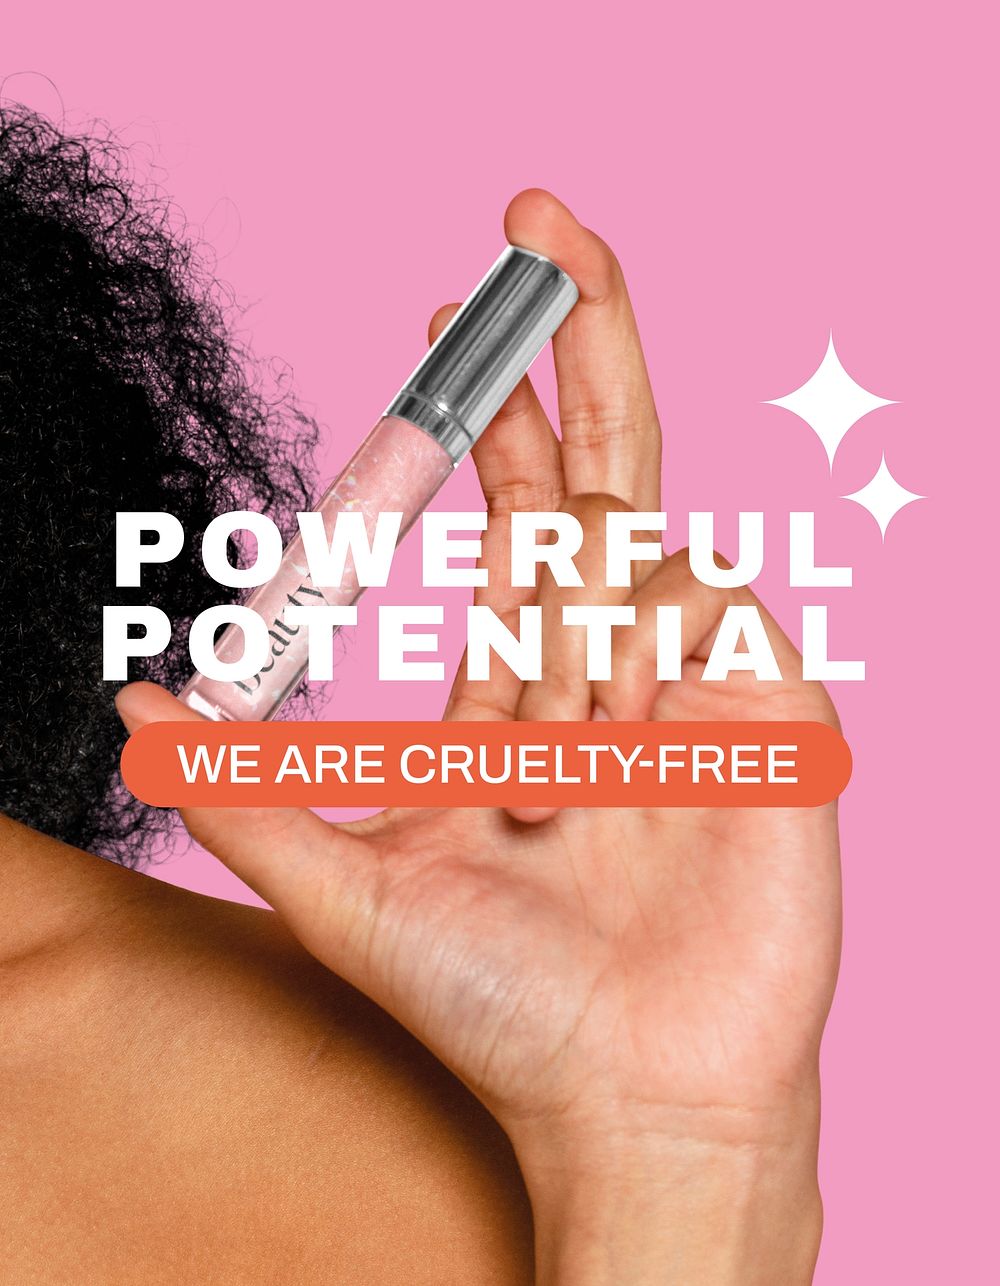 Cruelty-free makeup flyer editable template, business ad psd